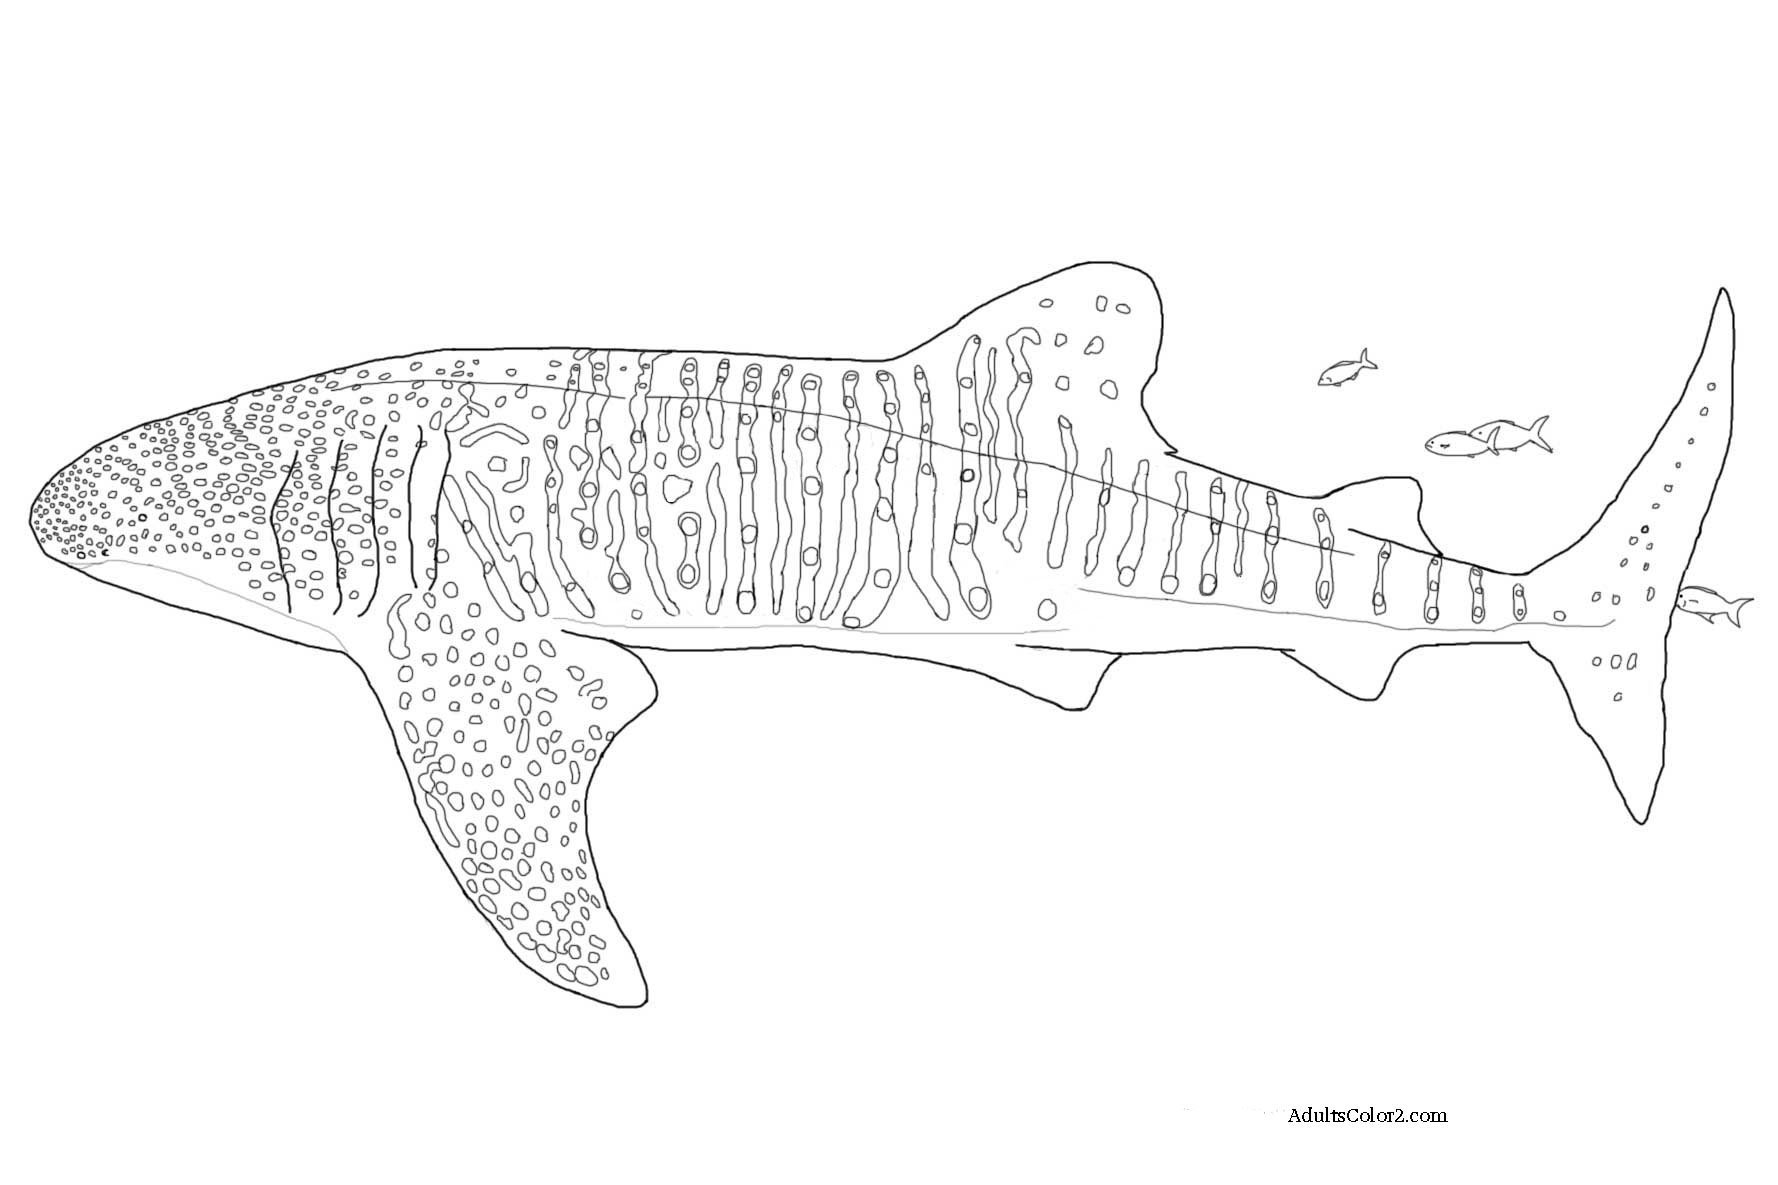 Sharkwhale coloring #4, Download drawings